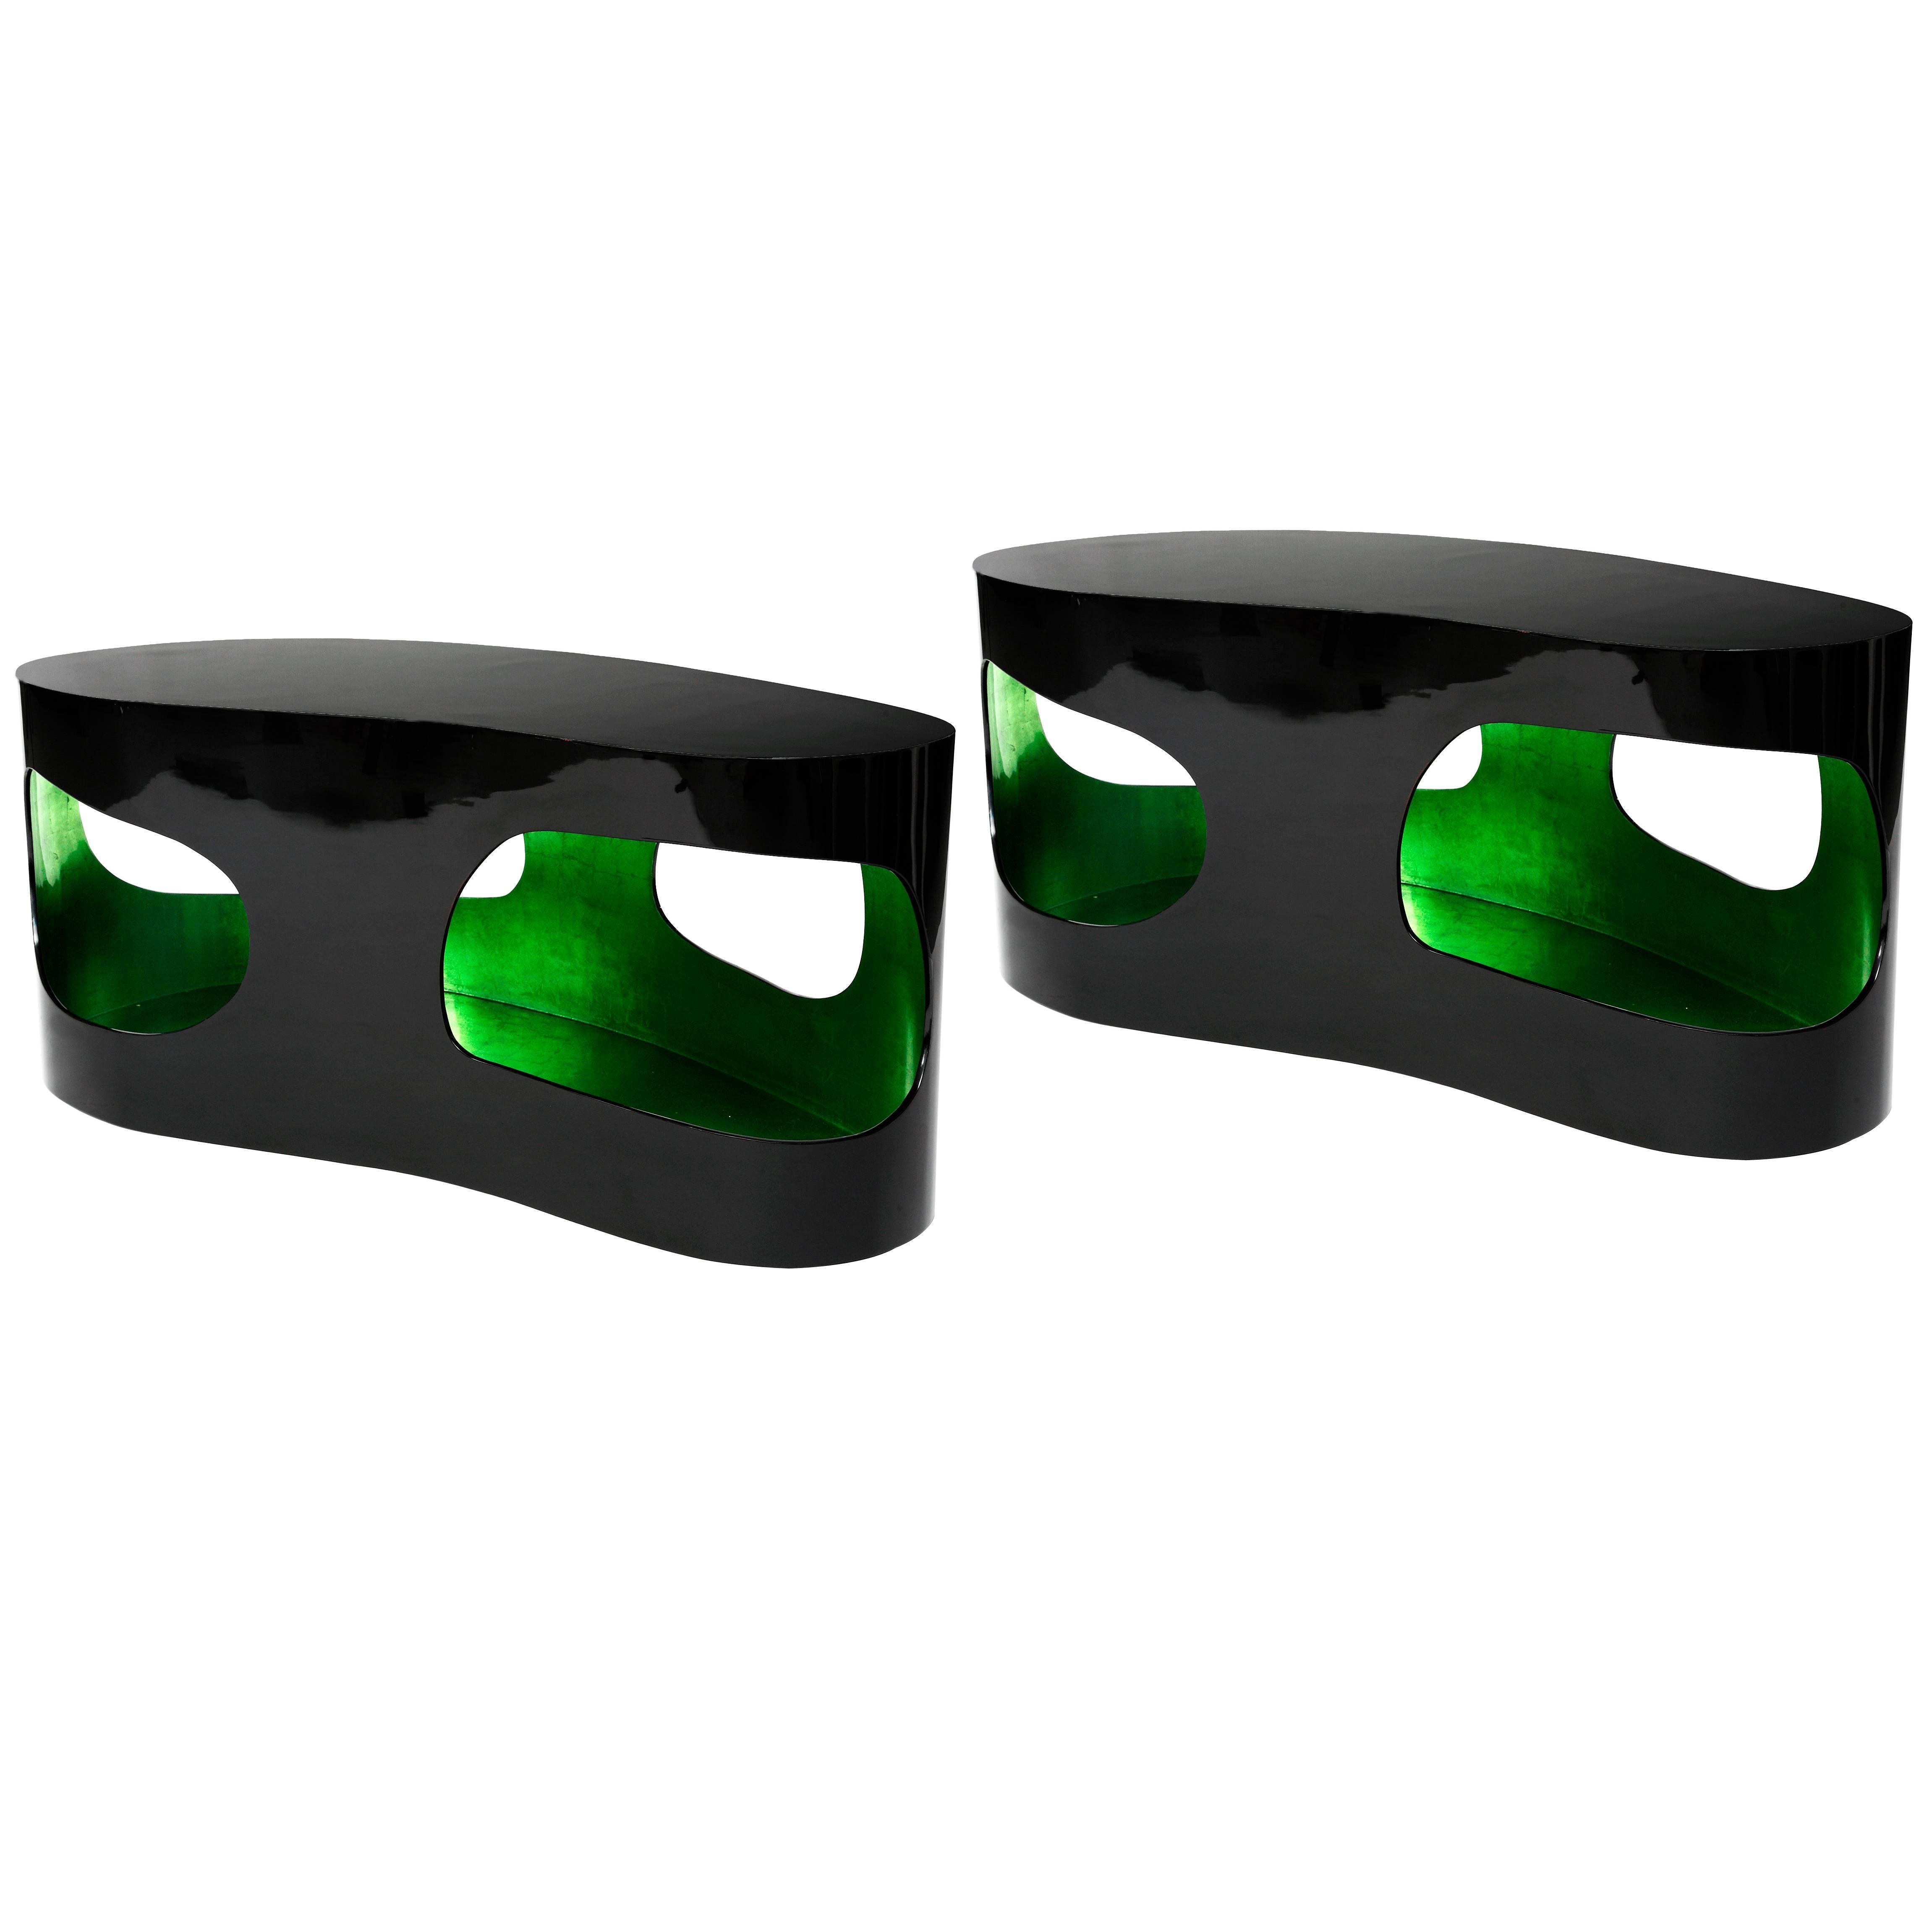 Pair of Black and Green Lacquer Coffee Tables by Jacques Jarrige